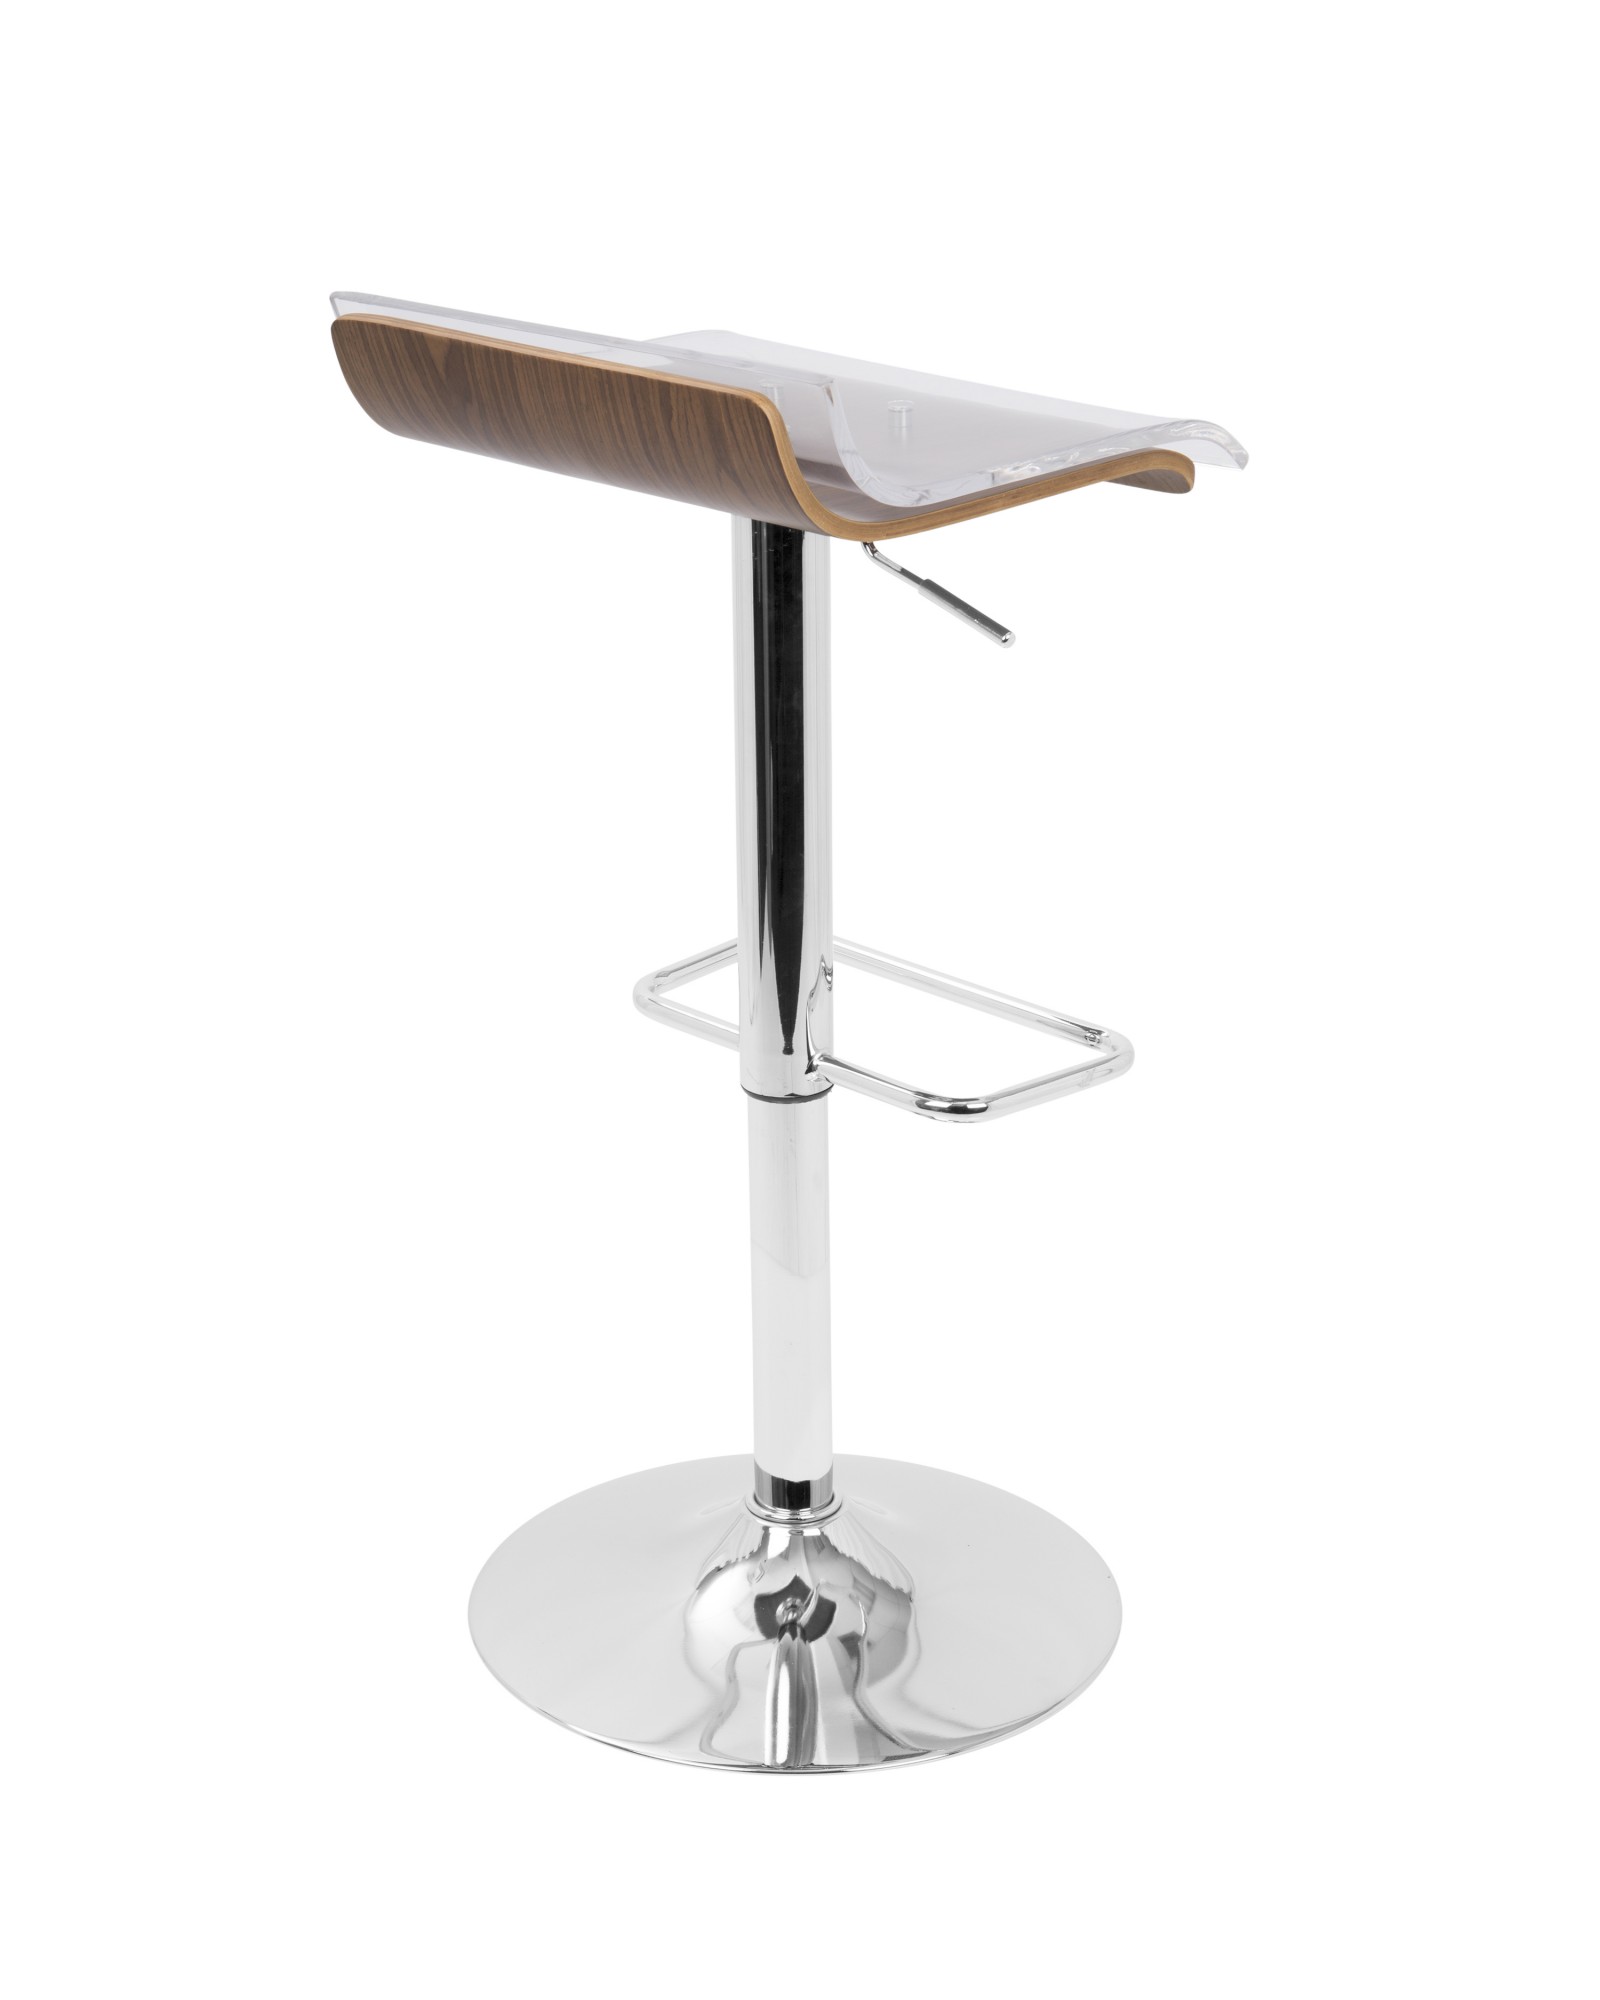 2-Tier Contemporary Barstool with Swivel in Walnut and Clear